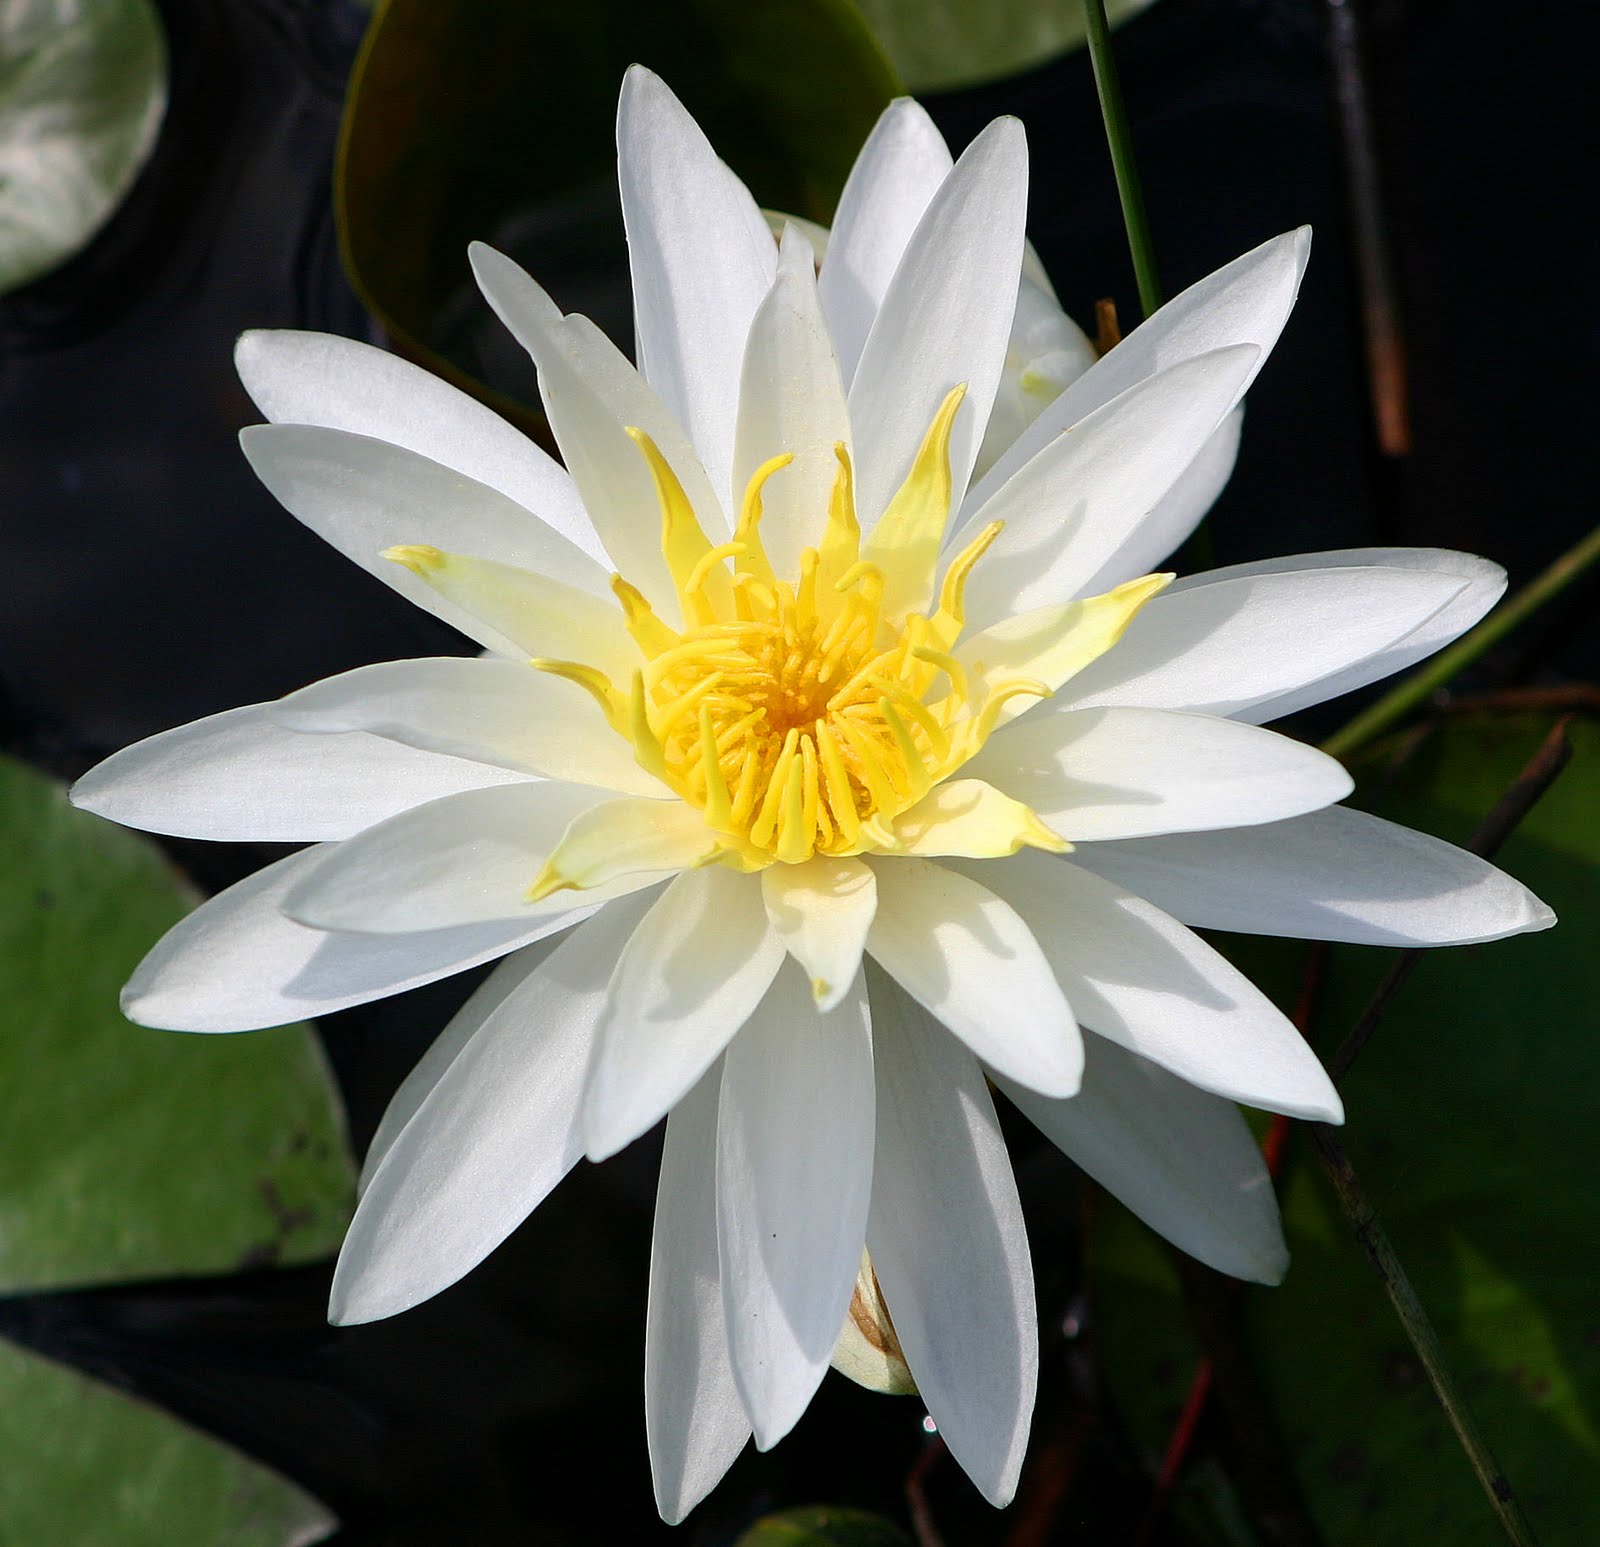 Gallery of picture of a lily flower.